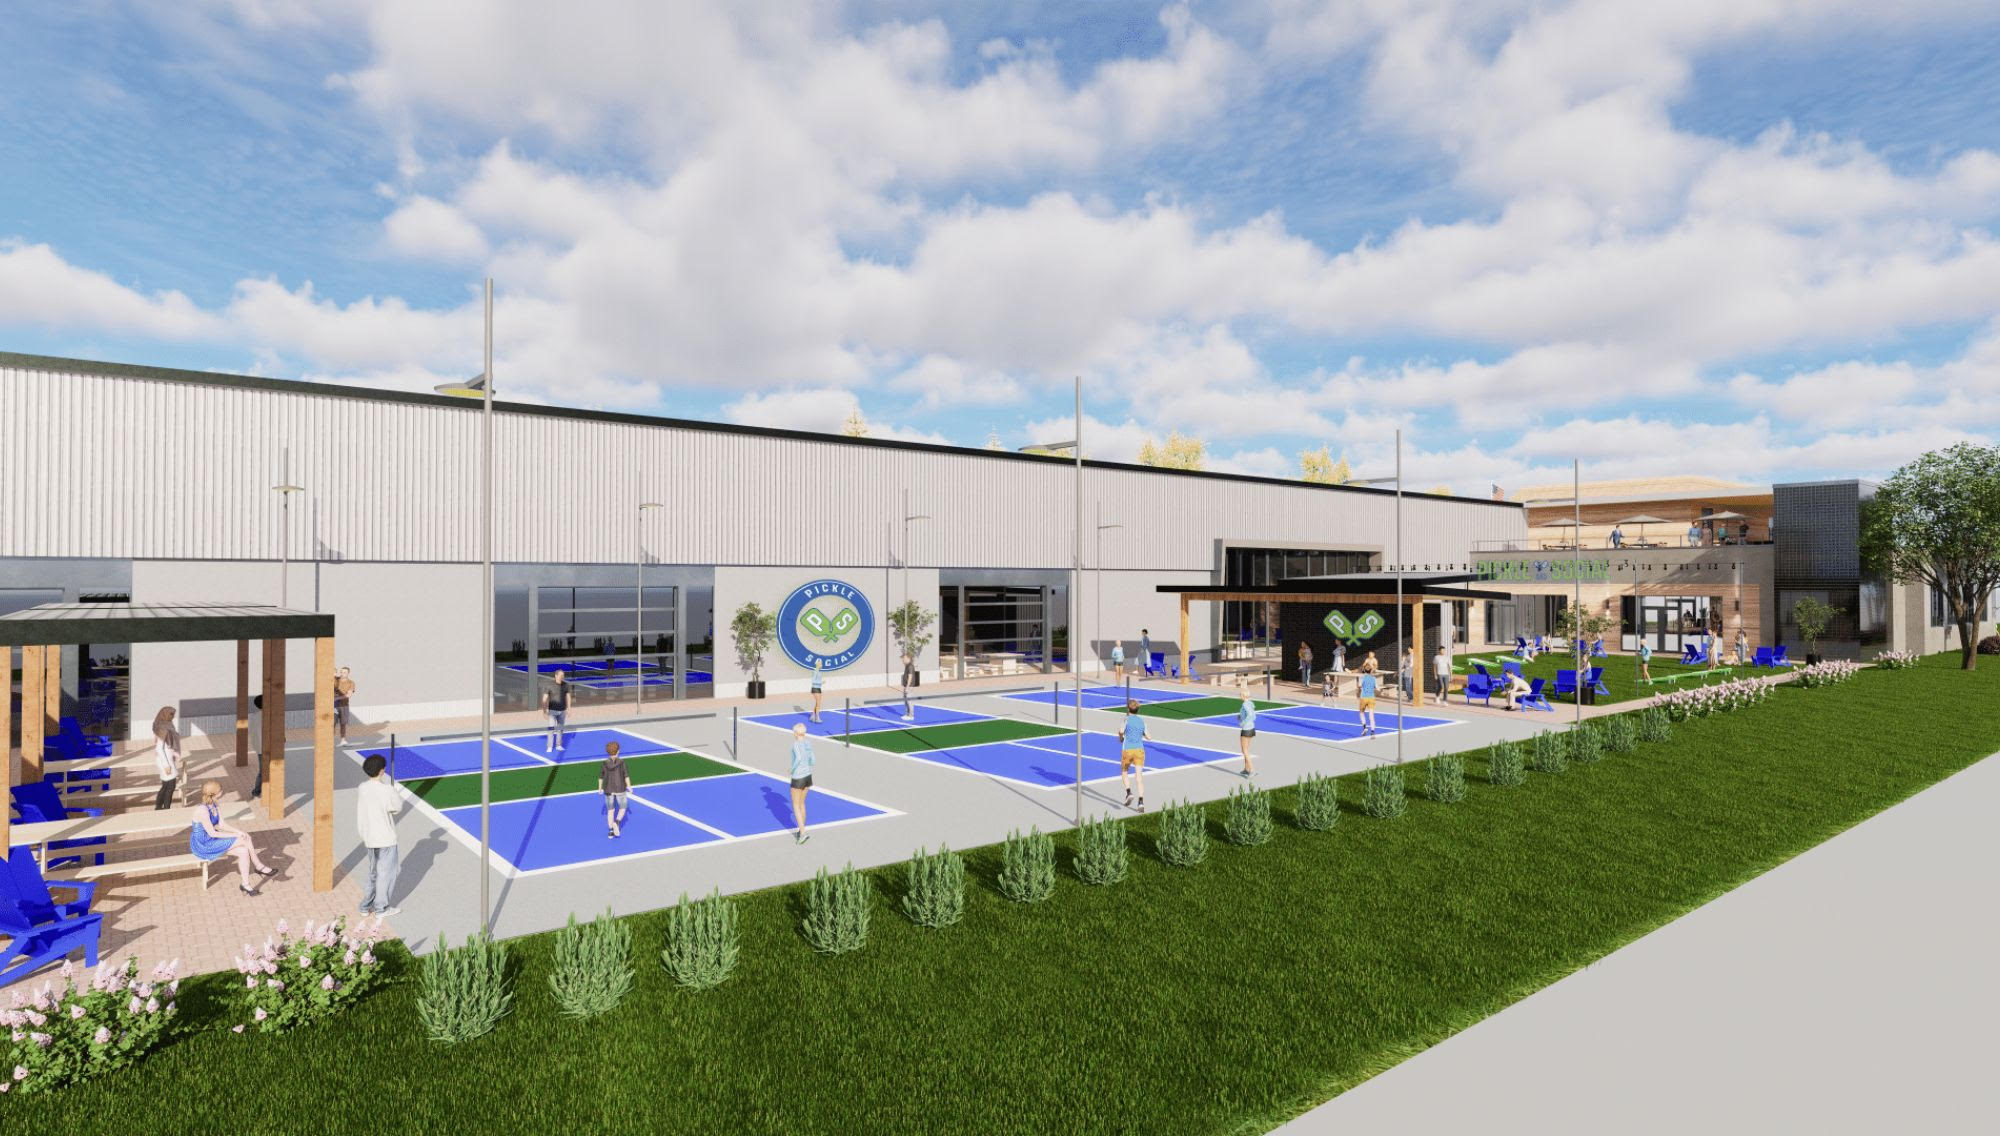 Developers of the Pickle & Social brand are offering local accredited investors the opportunity to invest in the new Pickle & Social venue being built in Louisville.